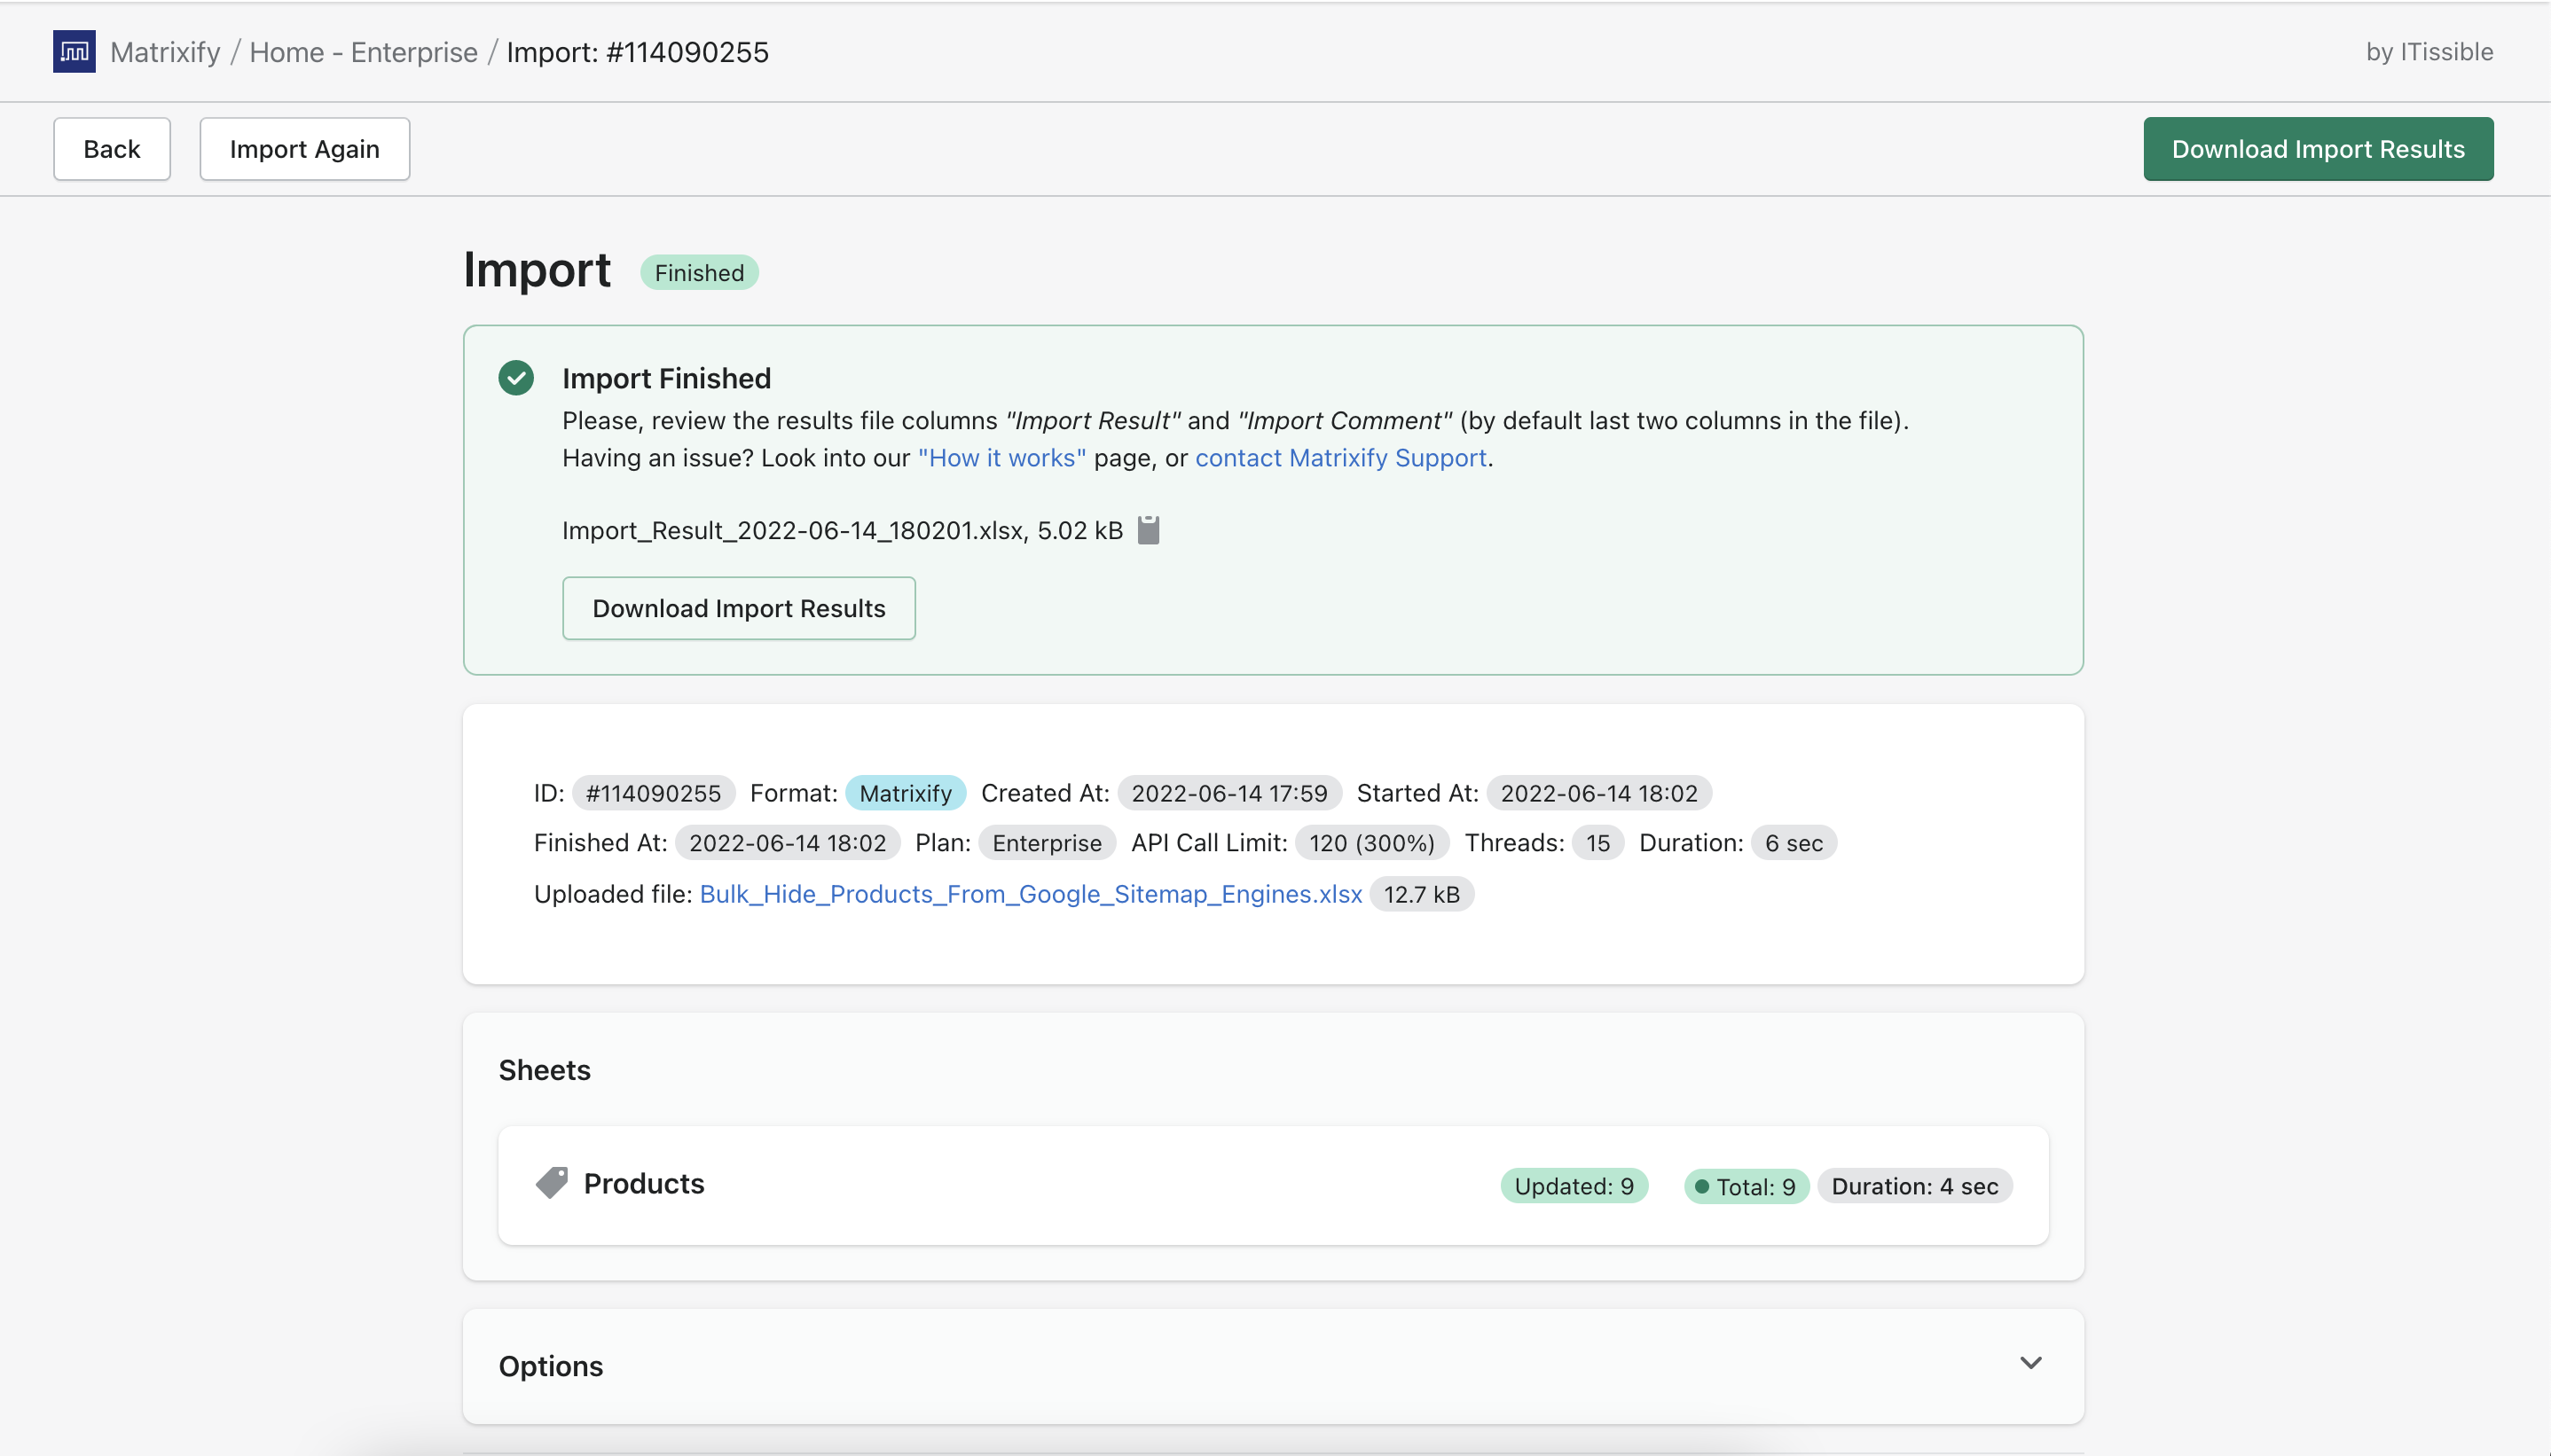 Bulk Hide Products from google sitemap engines import completed